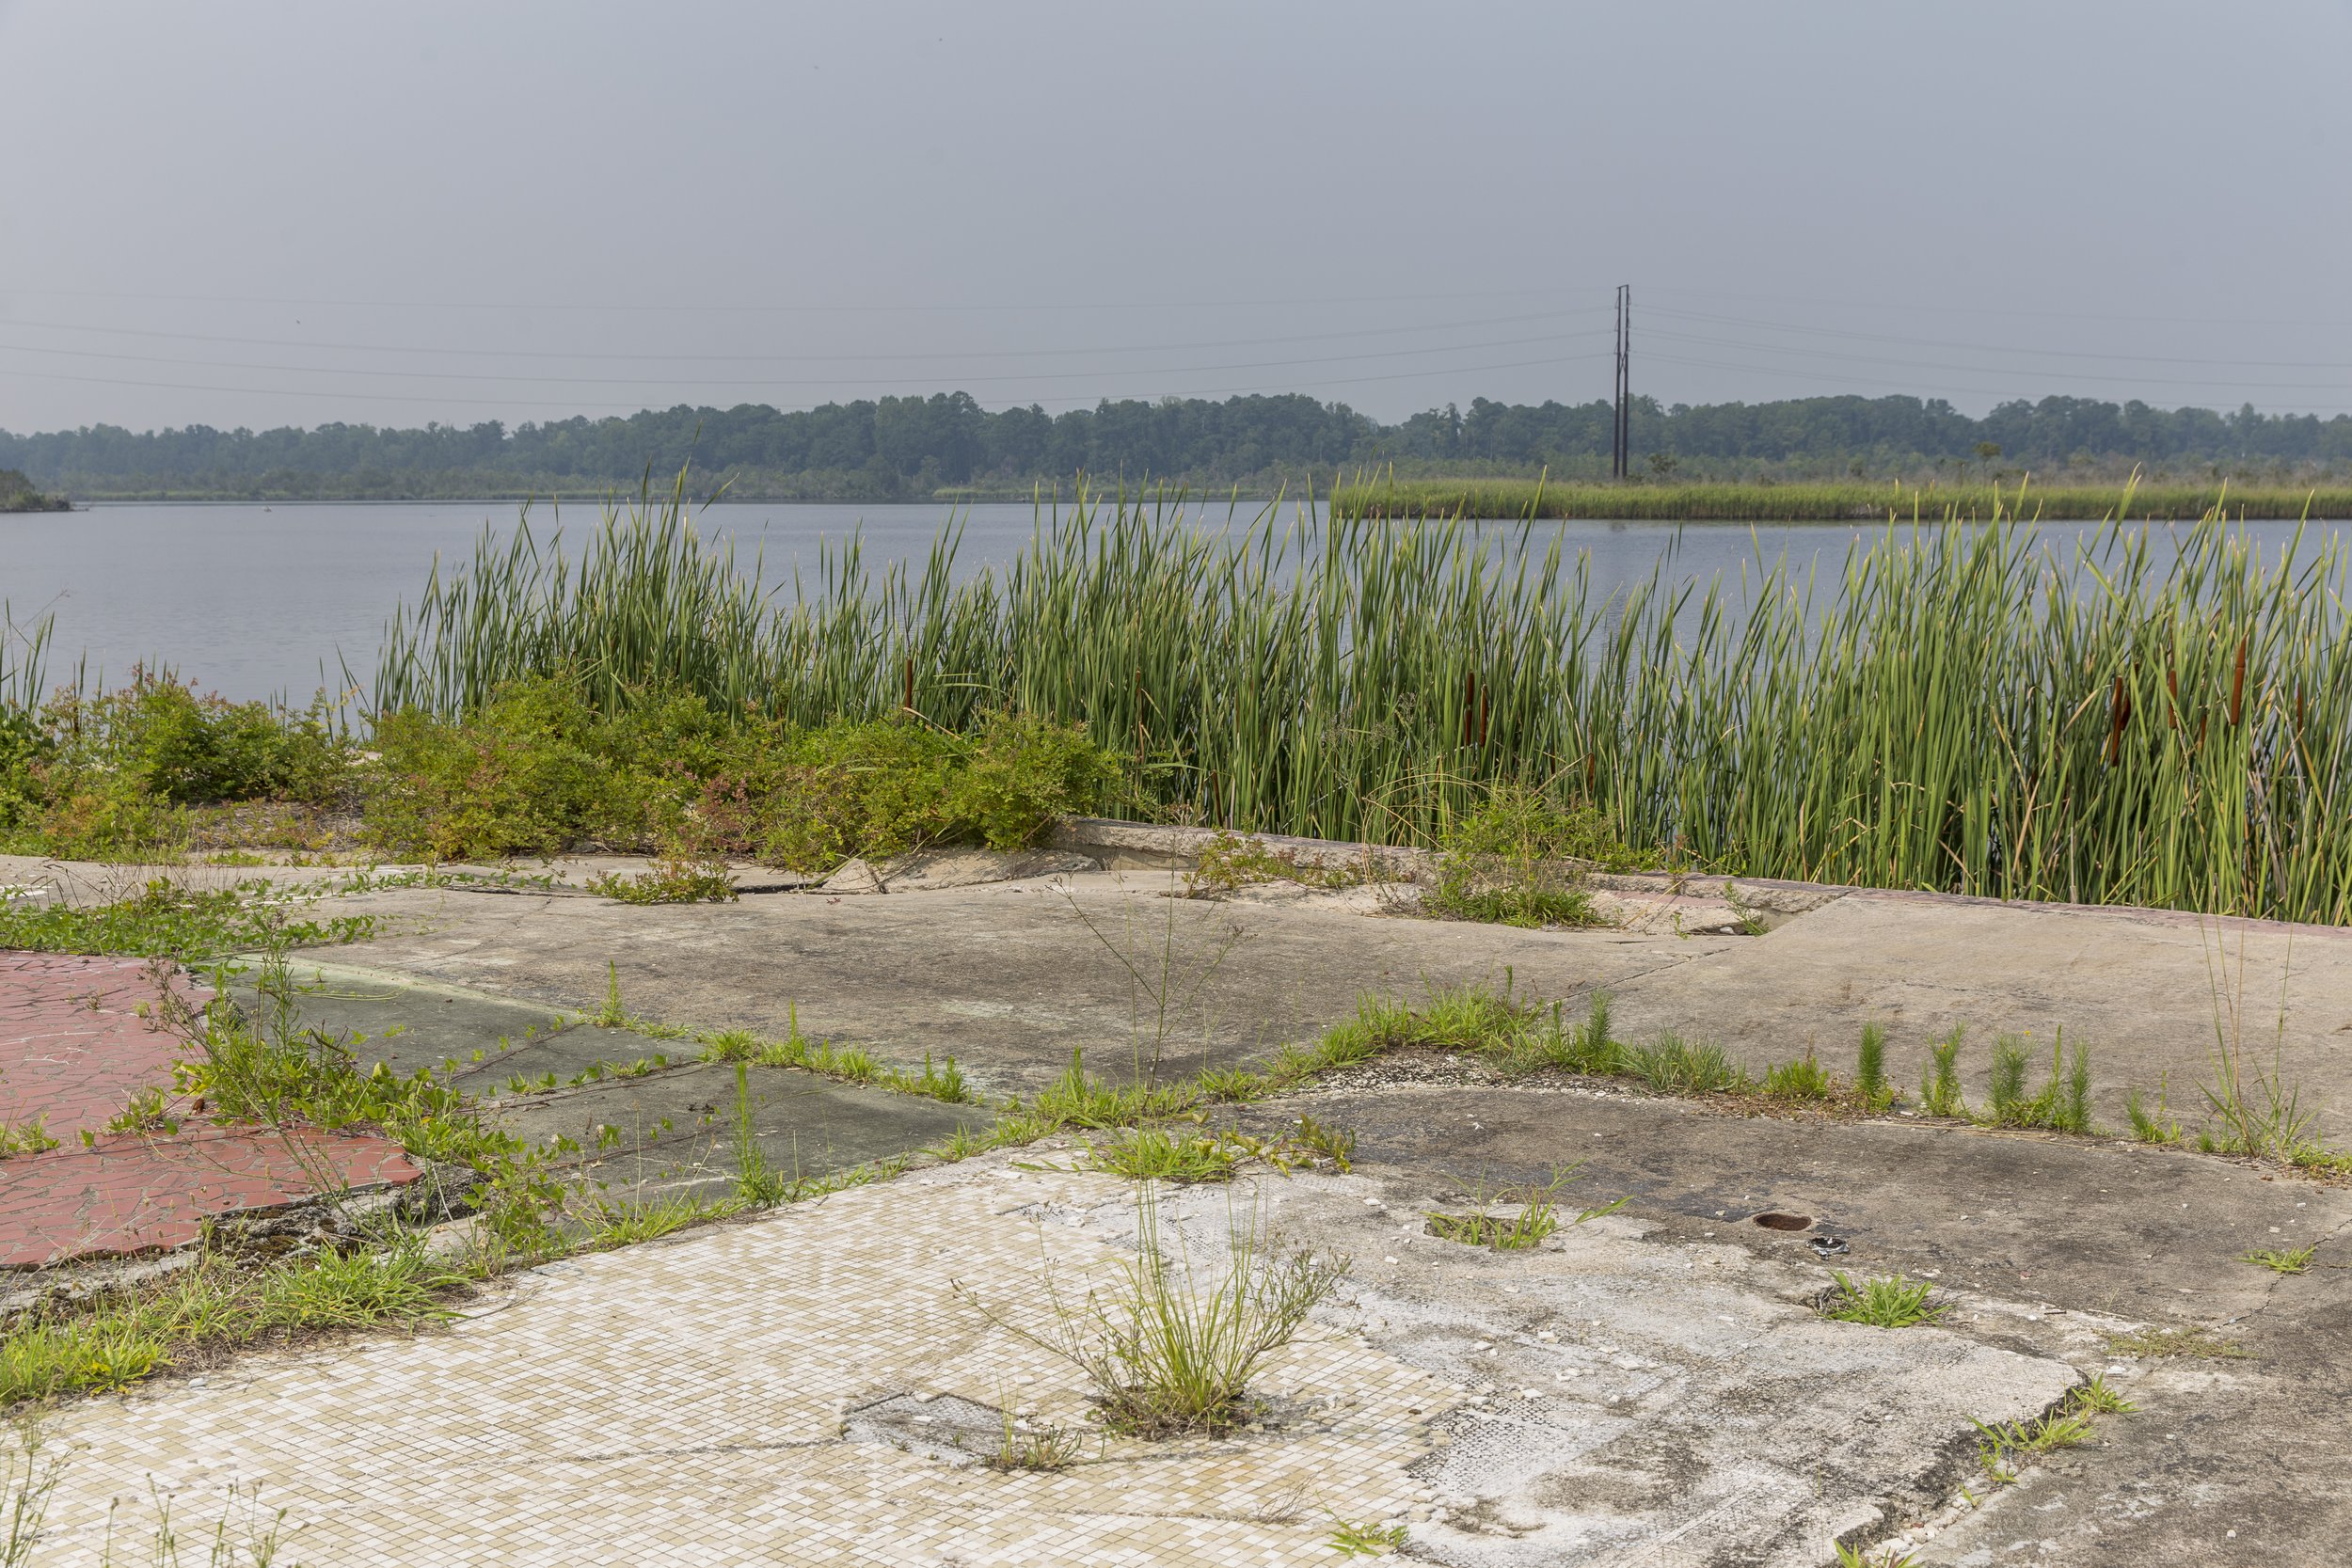  Weeds and grasses crop up against the New River in Jacksonville, NC on Tuesday, July 18, 2023. (Rachel Jessen for NBC News) 